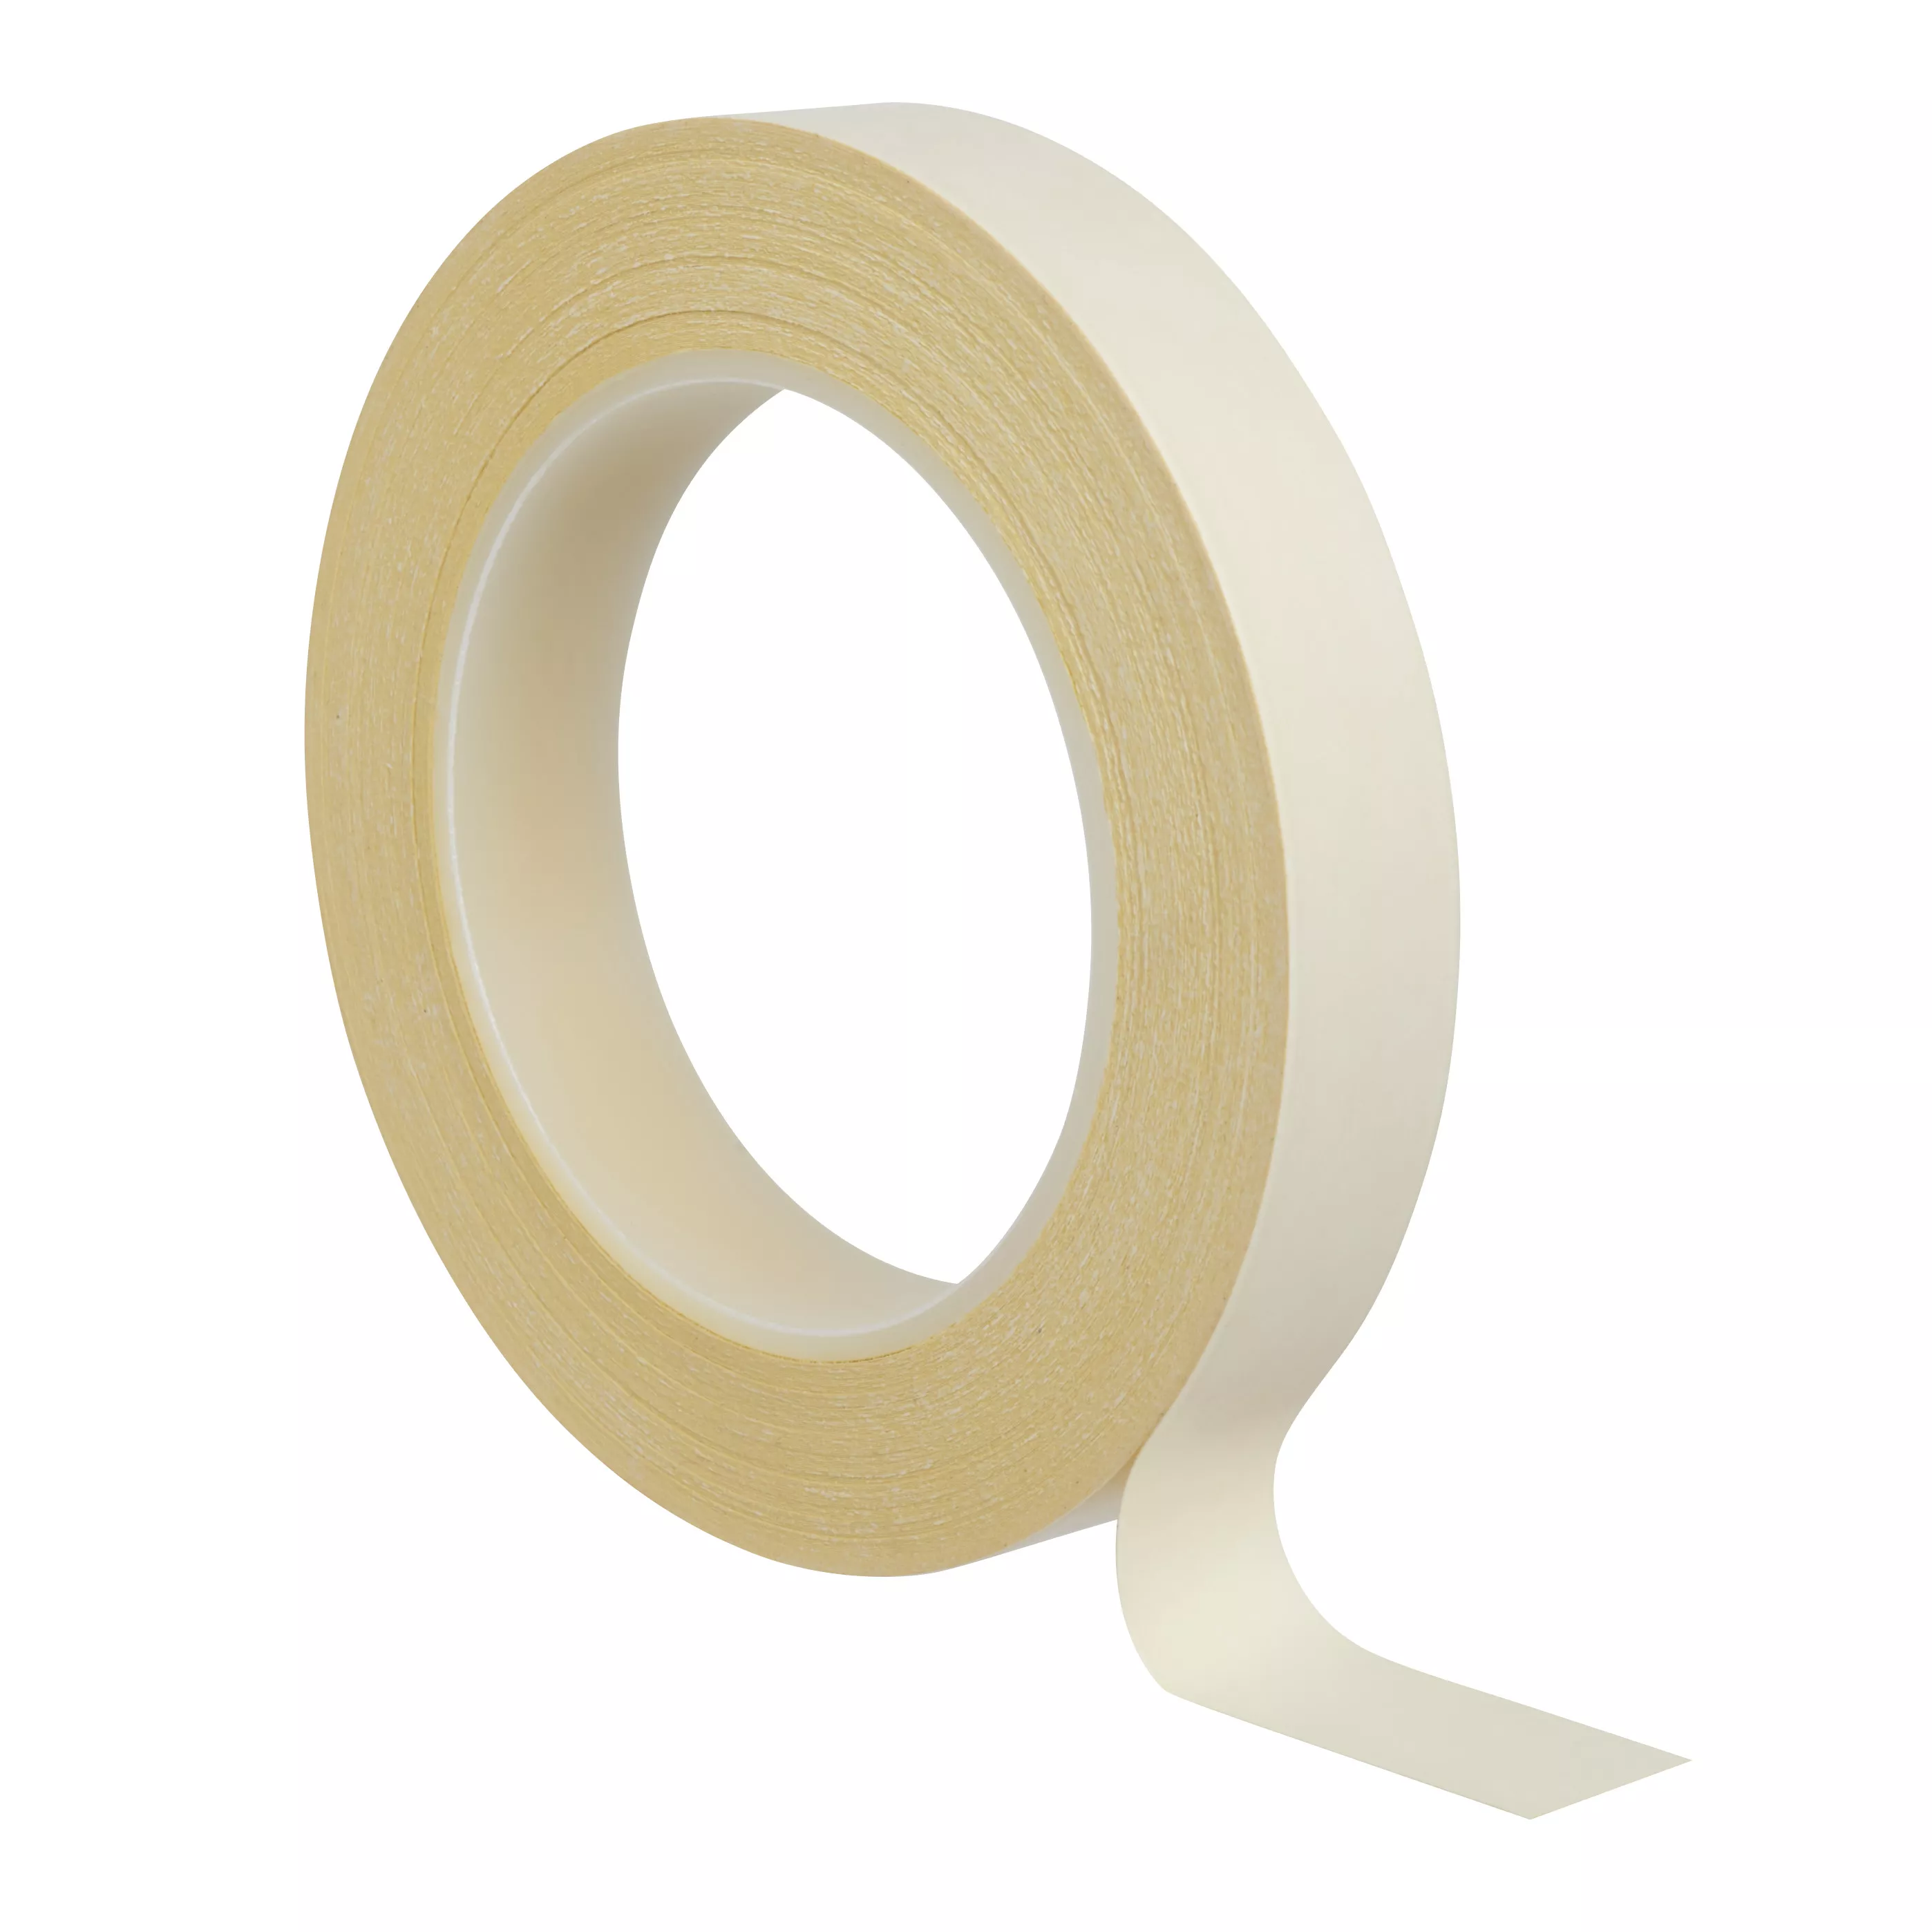 SKU 7010045325 | 3M™ Polyester Film Electrical Tape 75